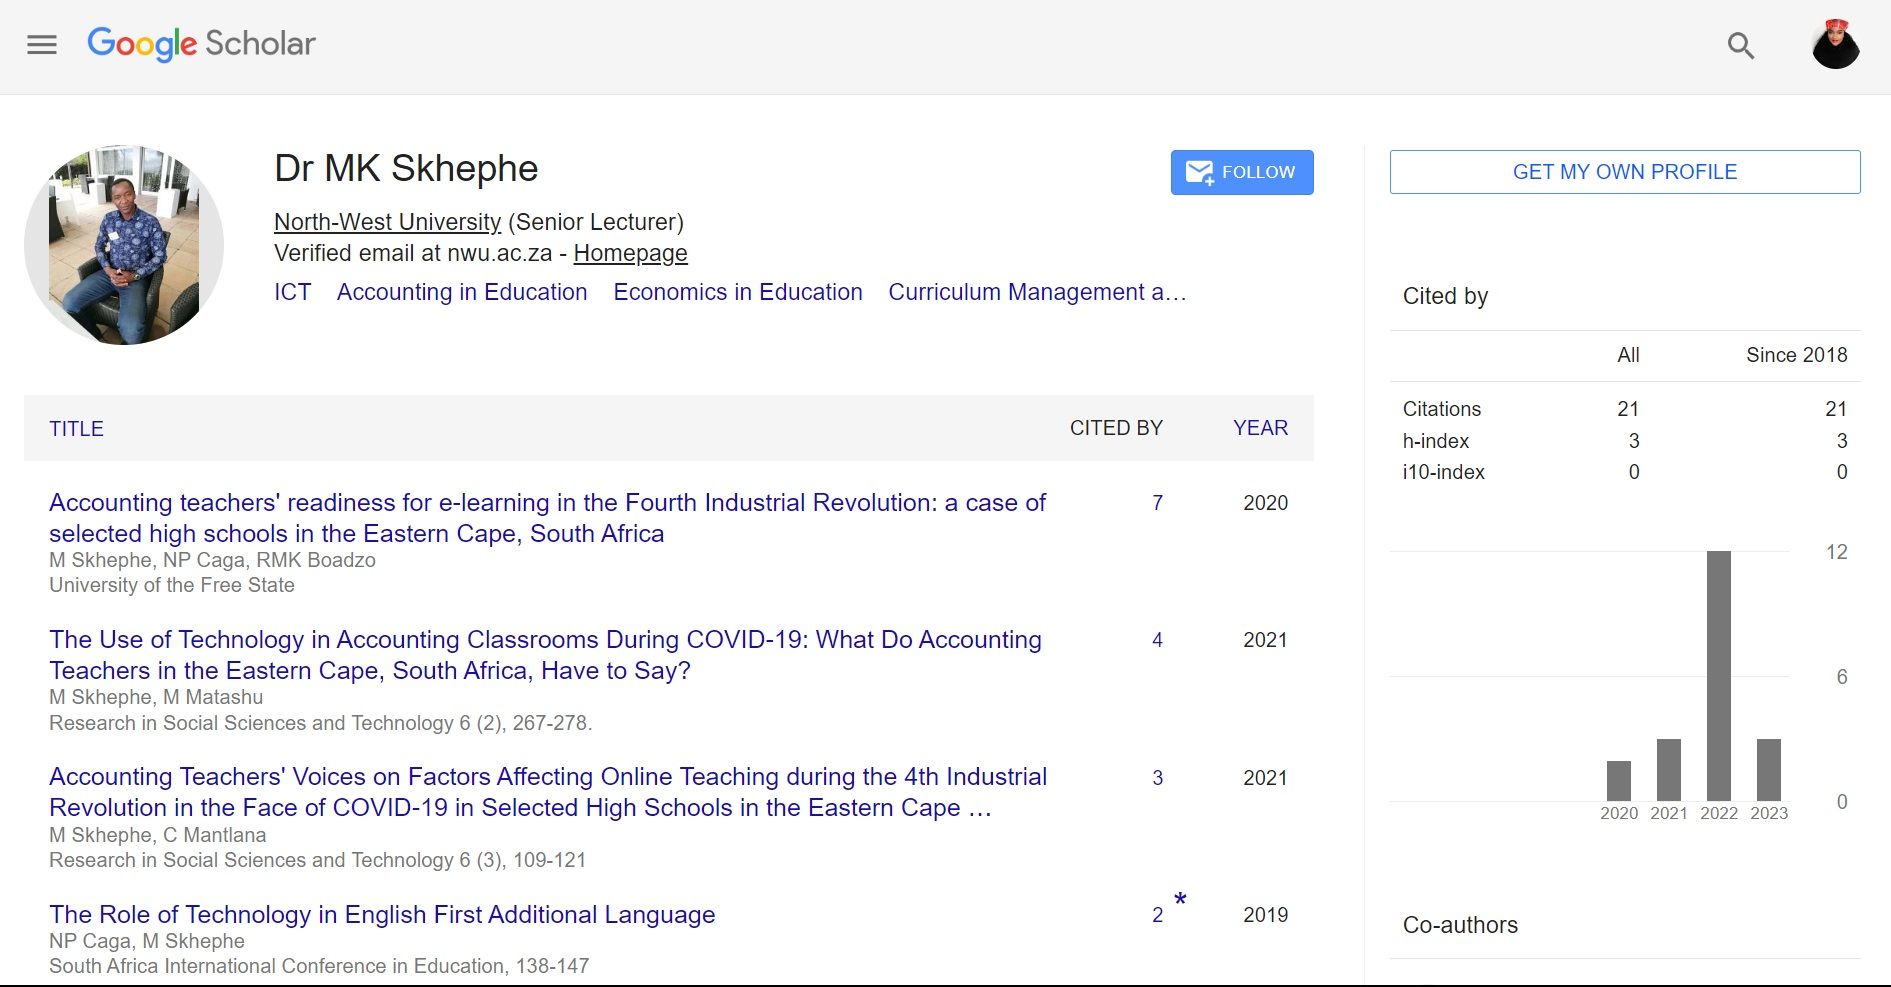 Author page on Google Scholar